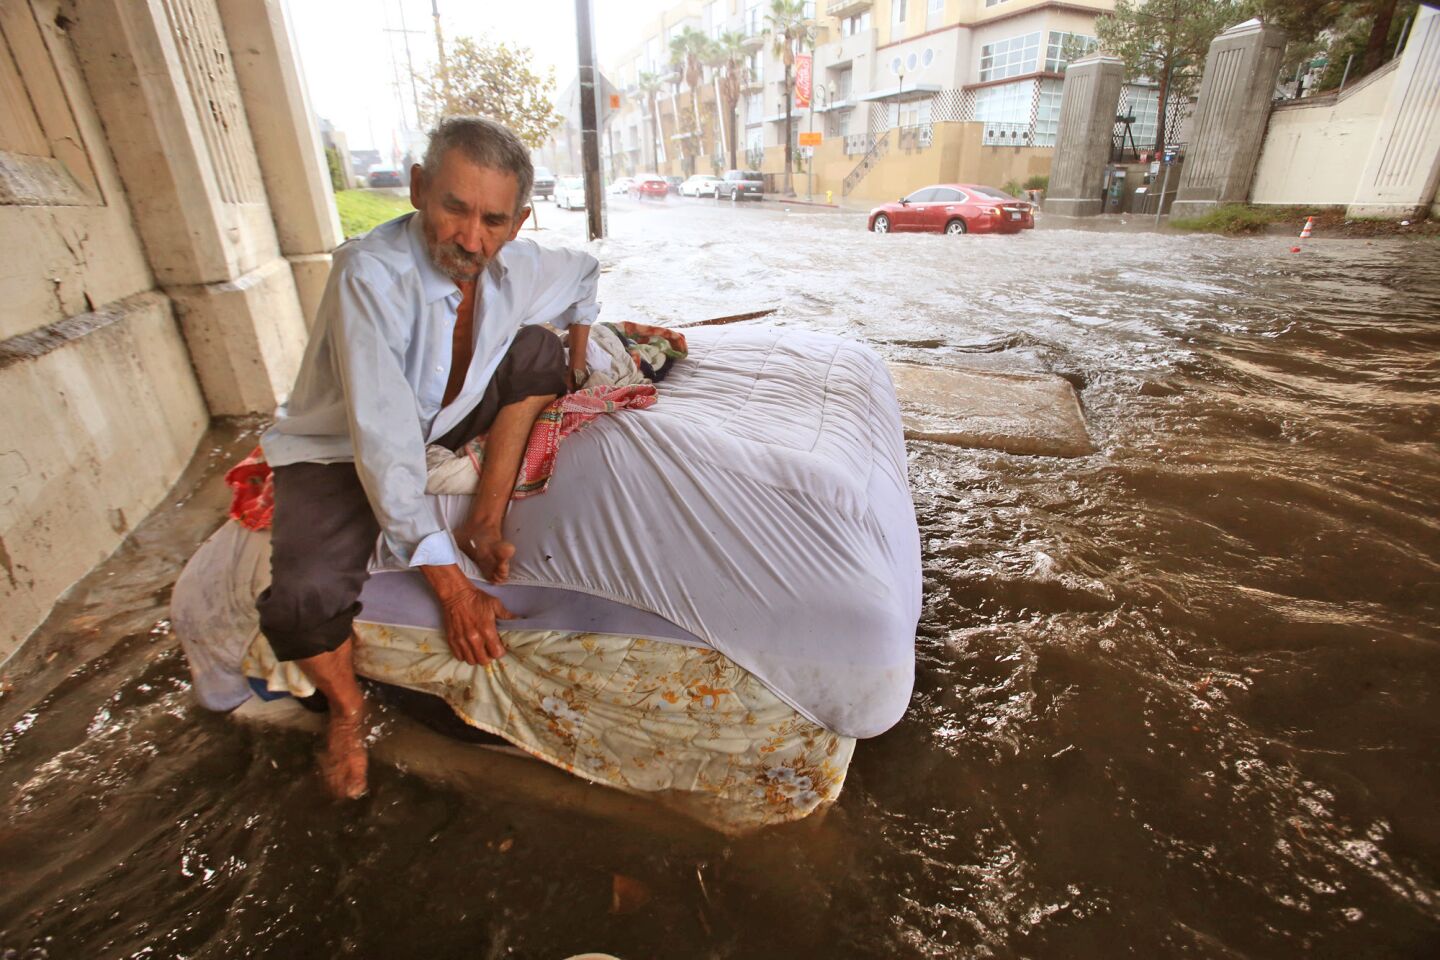 Felipe Flores Lopez, 59, tries to stay afloat on a bed at his homeless encampment as rainwater floods a section of Avenue 26.